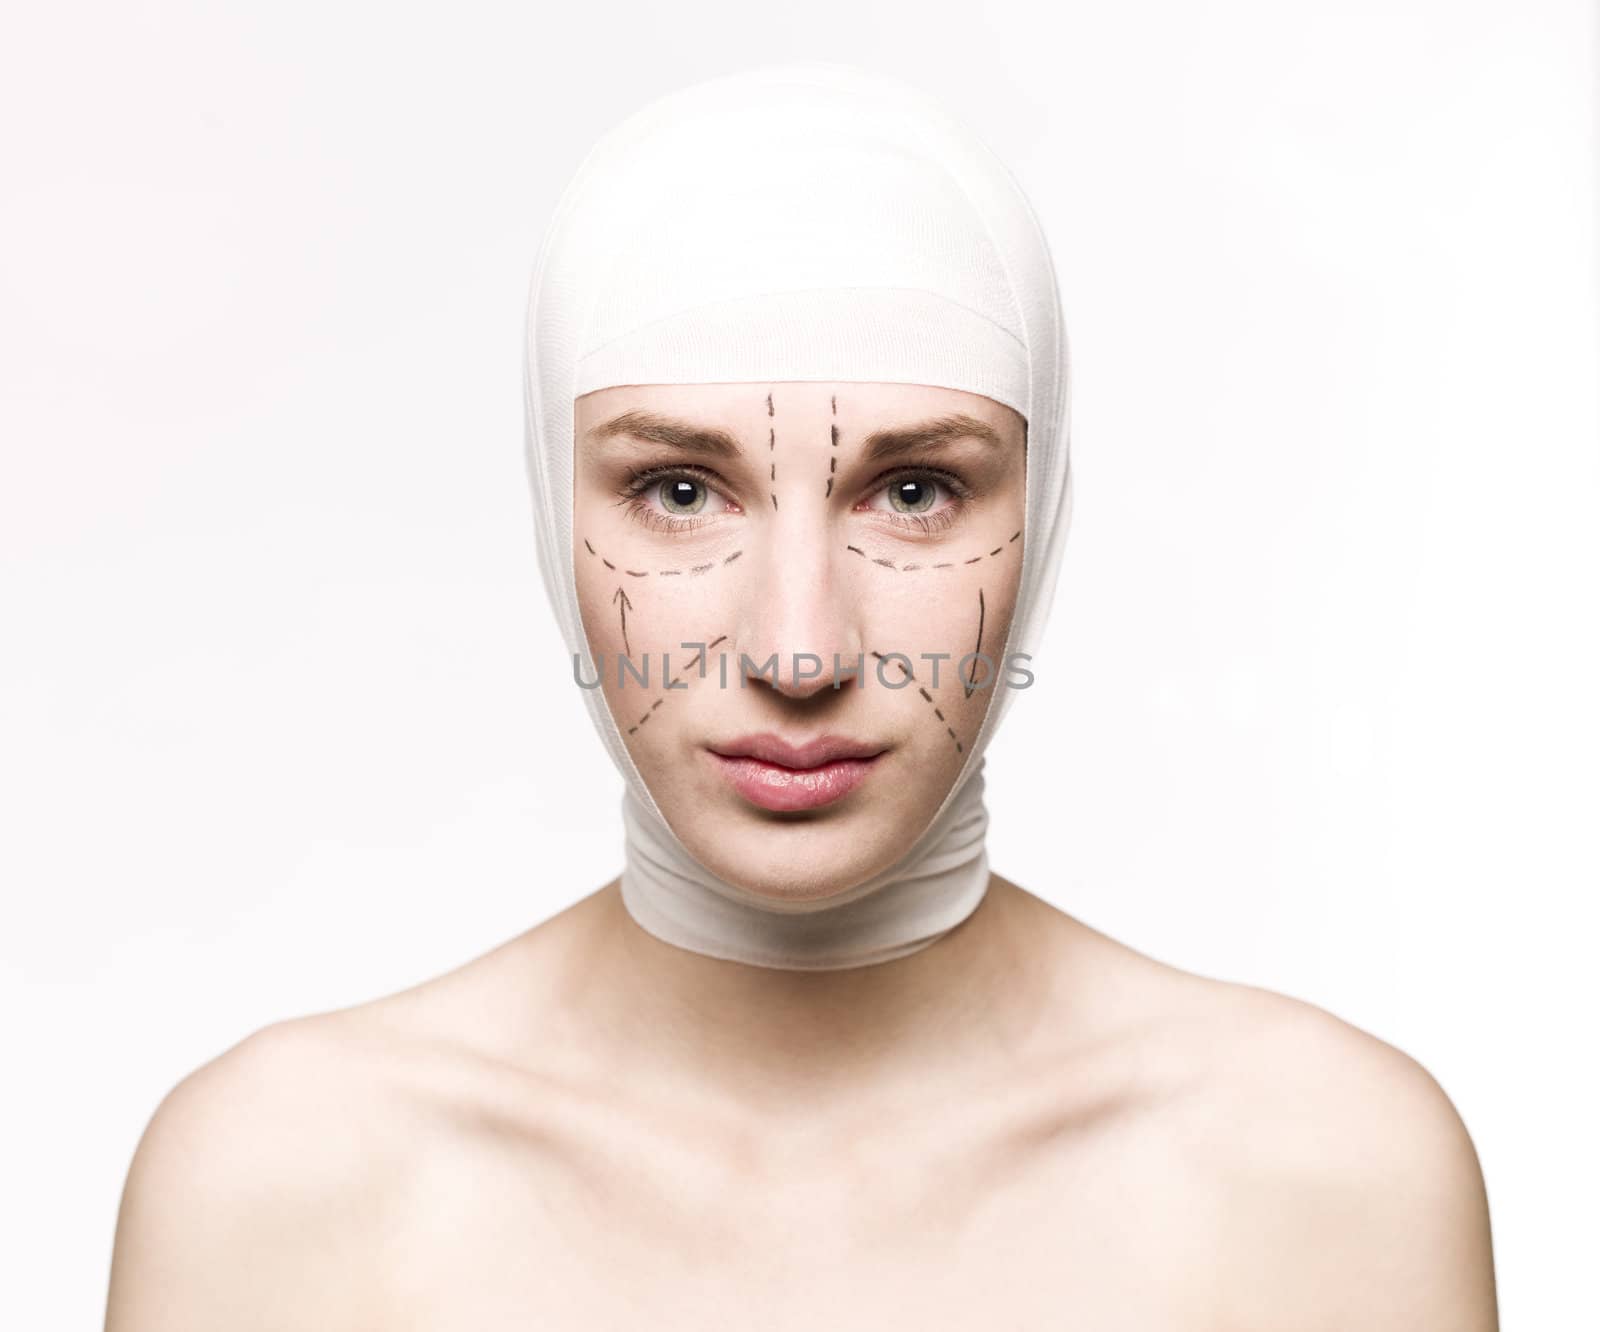 Woman prepared for a plastic surgery